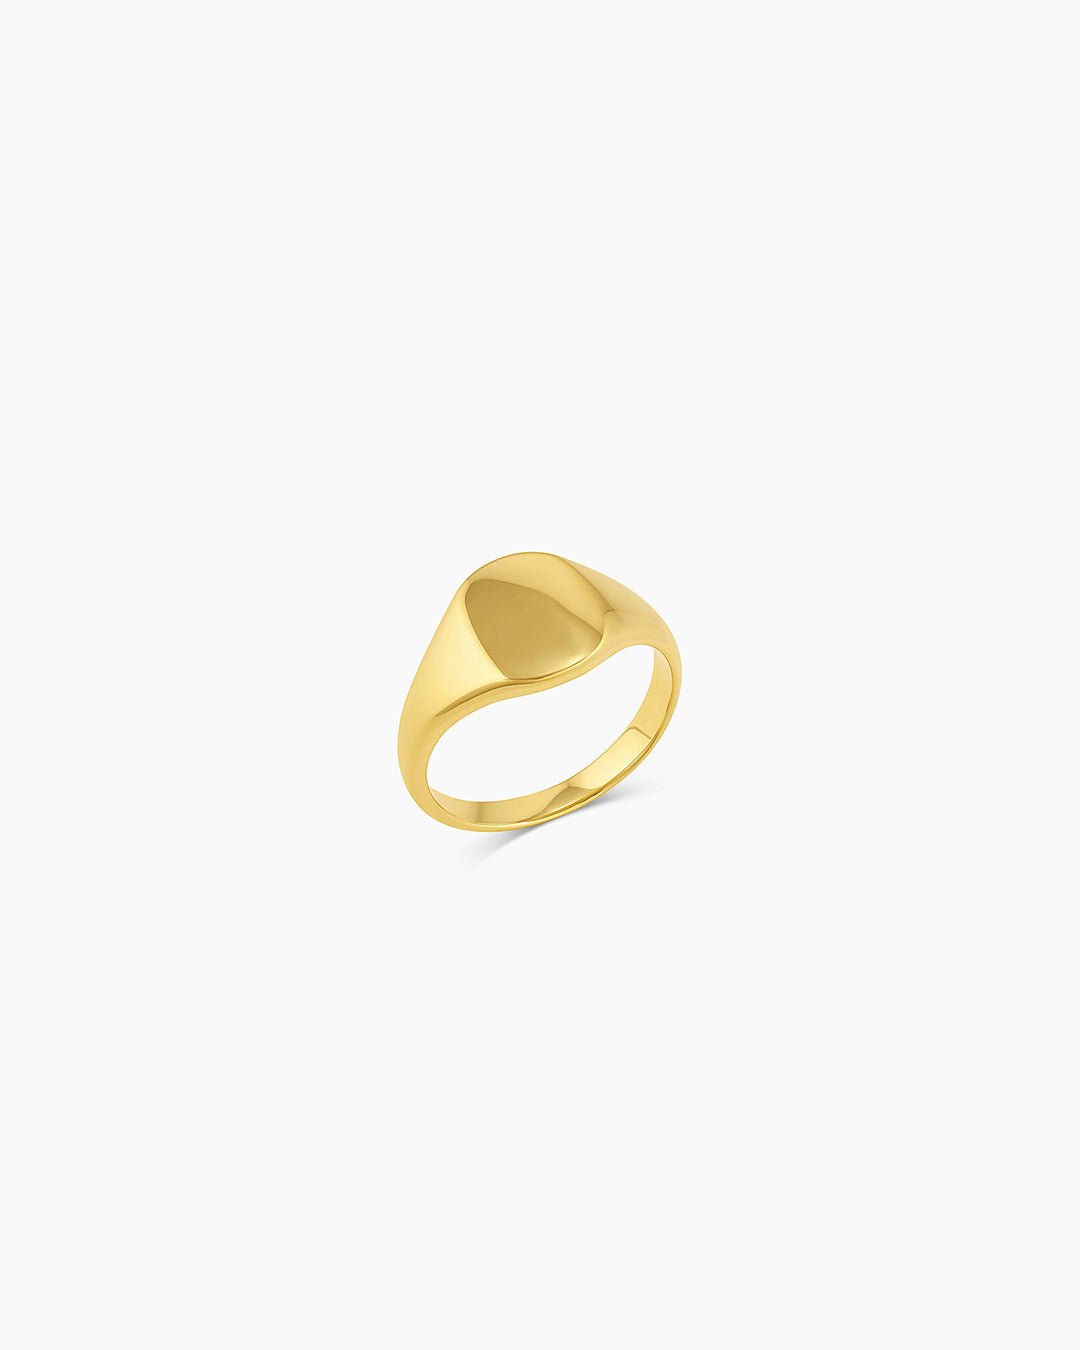 Gold plated engravable signet ring || option::Gold PlatedGold plated engravable signet ring || option::Gold Plated